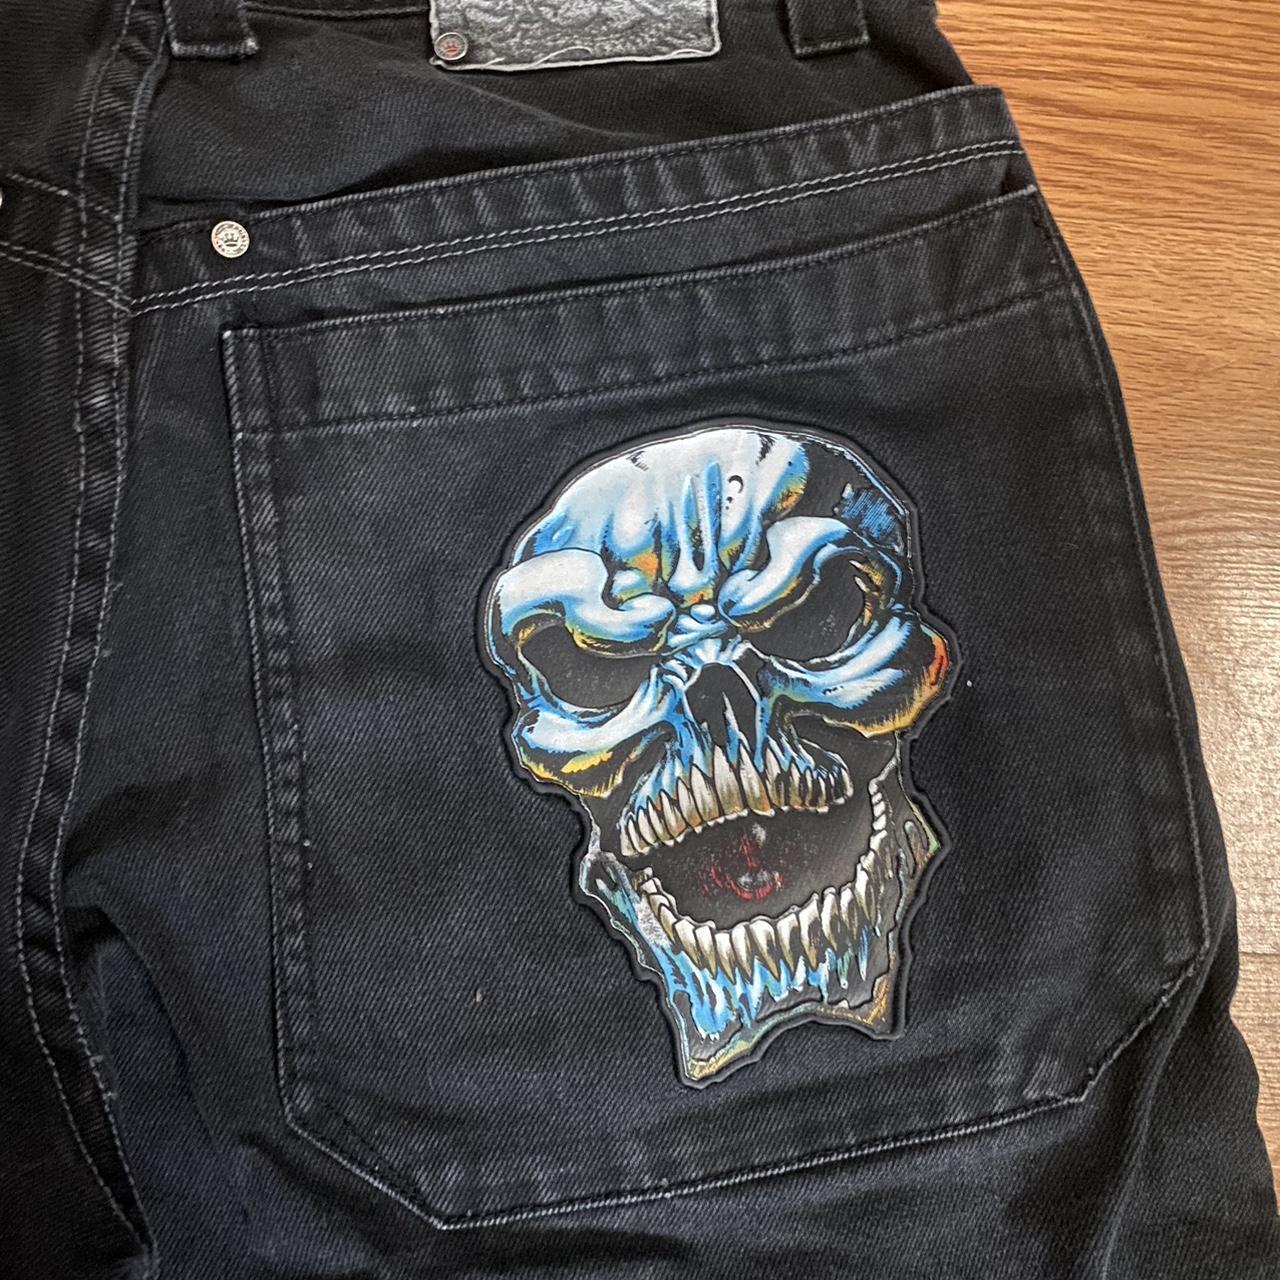 Insanely rare skull jnco jeans One of my most... - Depop